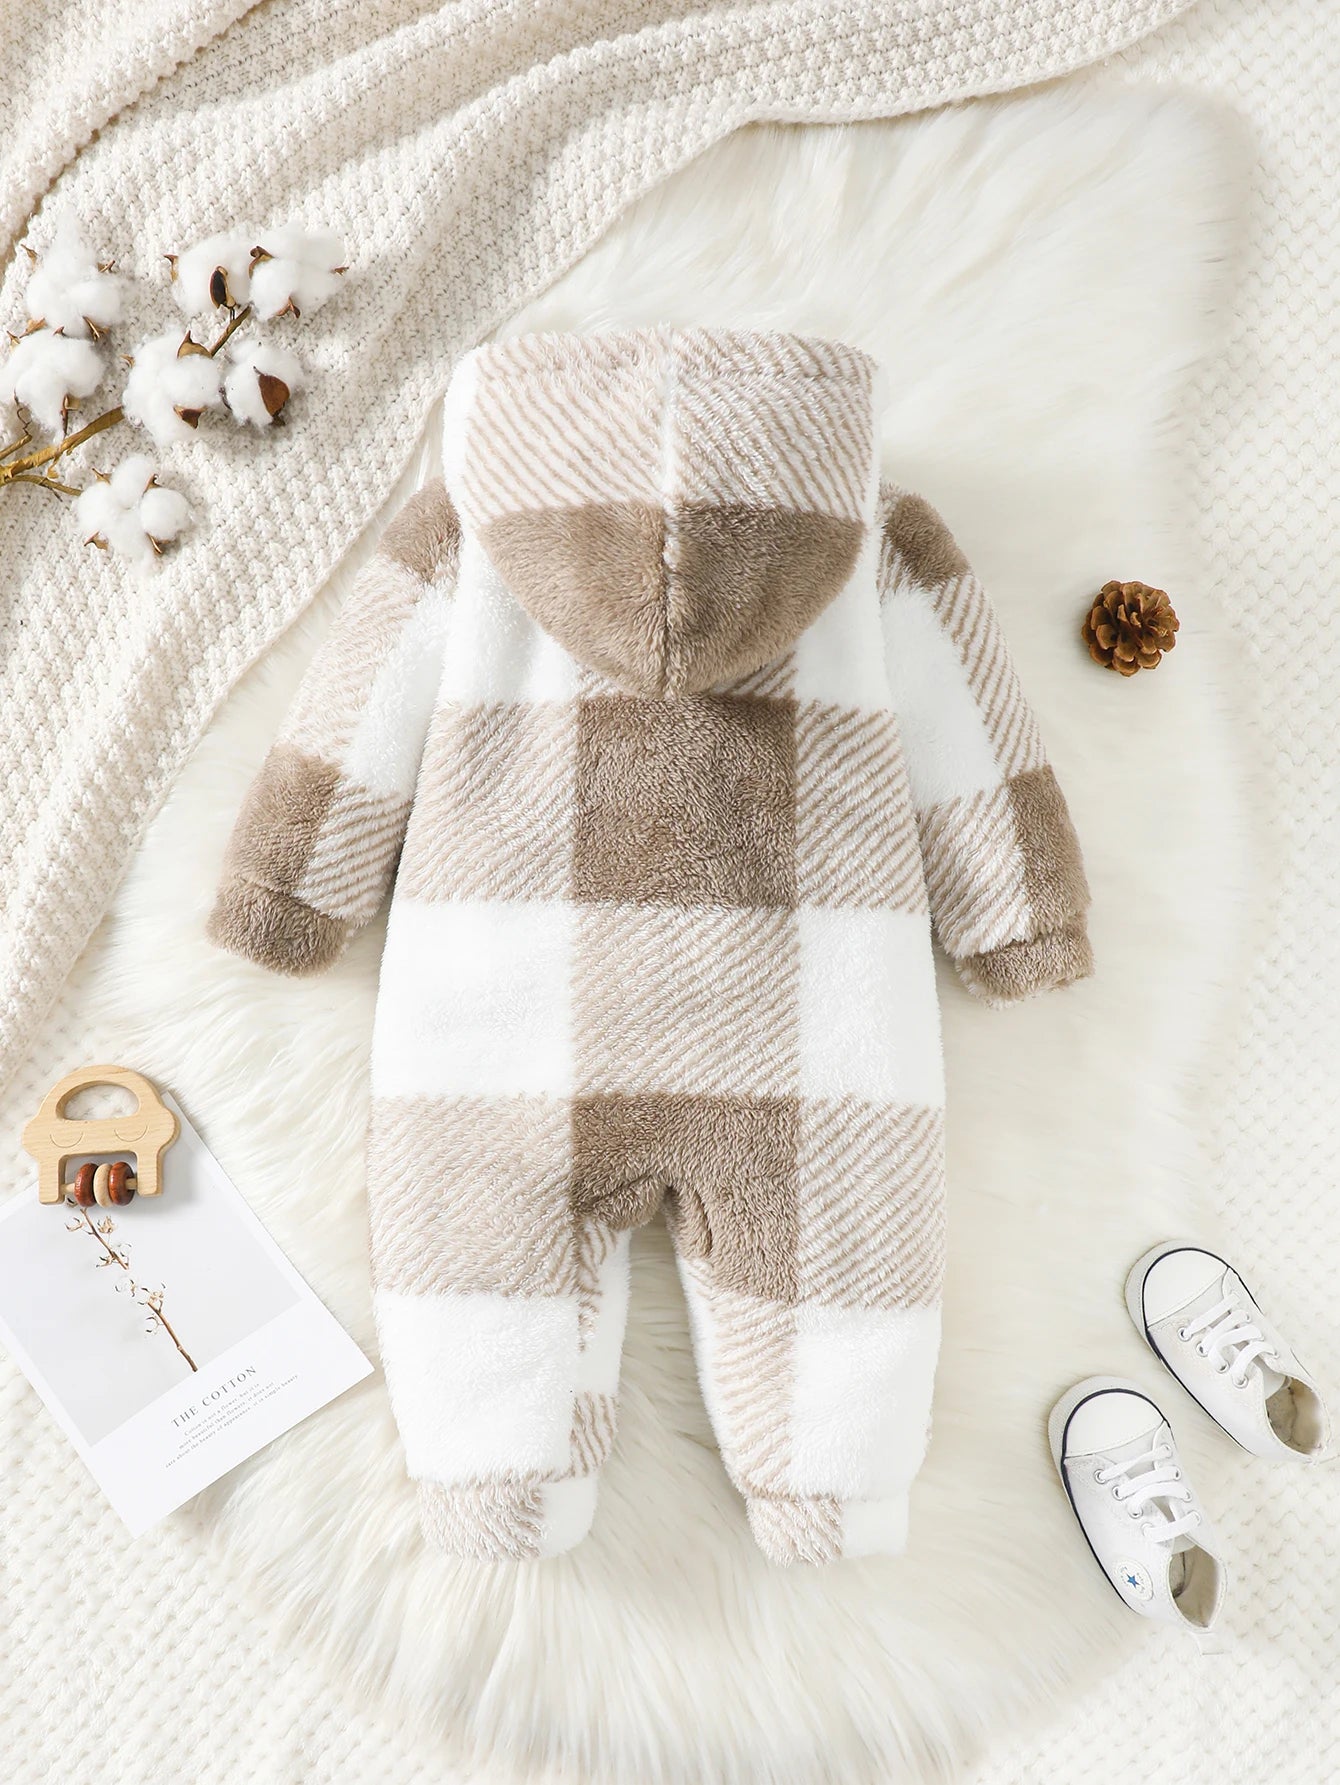 Baby Boys and Girls Plaid Romper Hooded Long Sleeved  Plush Jumpsuit Winter Warm Bodysuit Clothes for 3-24 Months Toddler Boy ShopOnlyDeal